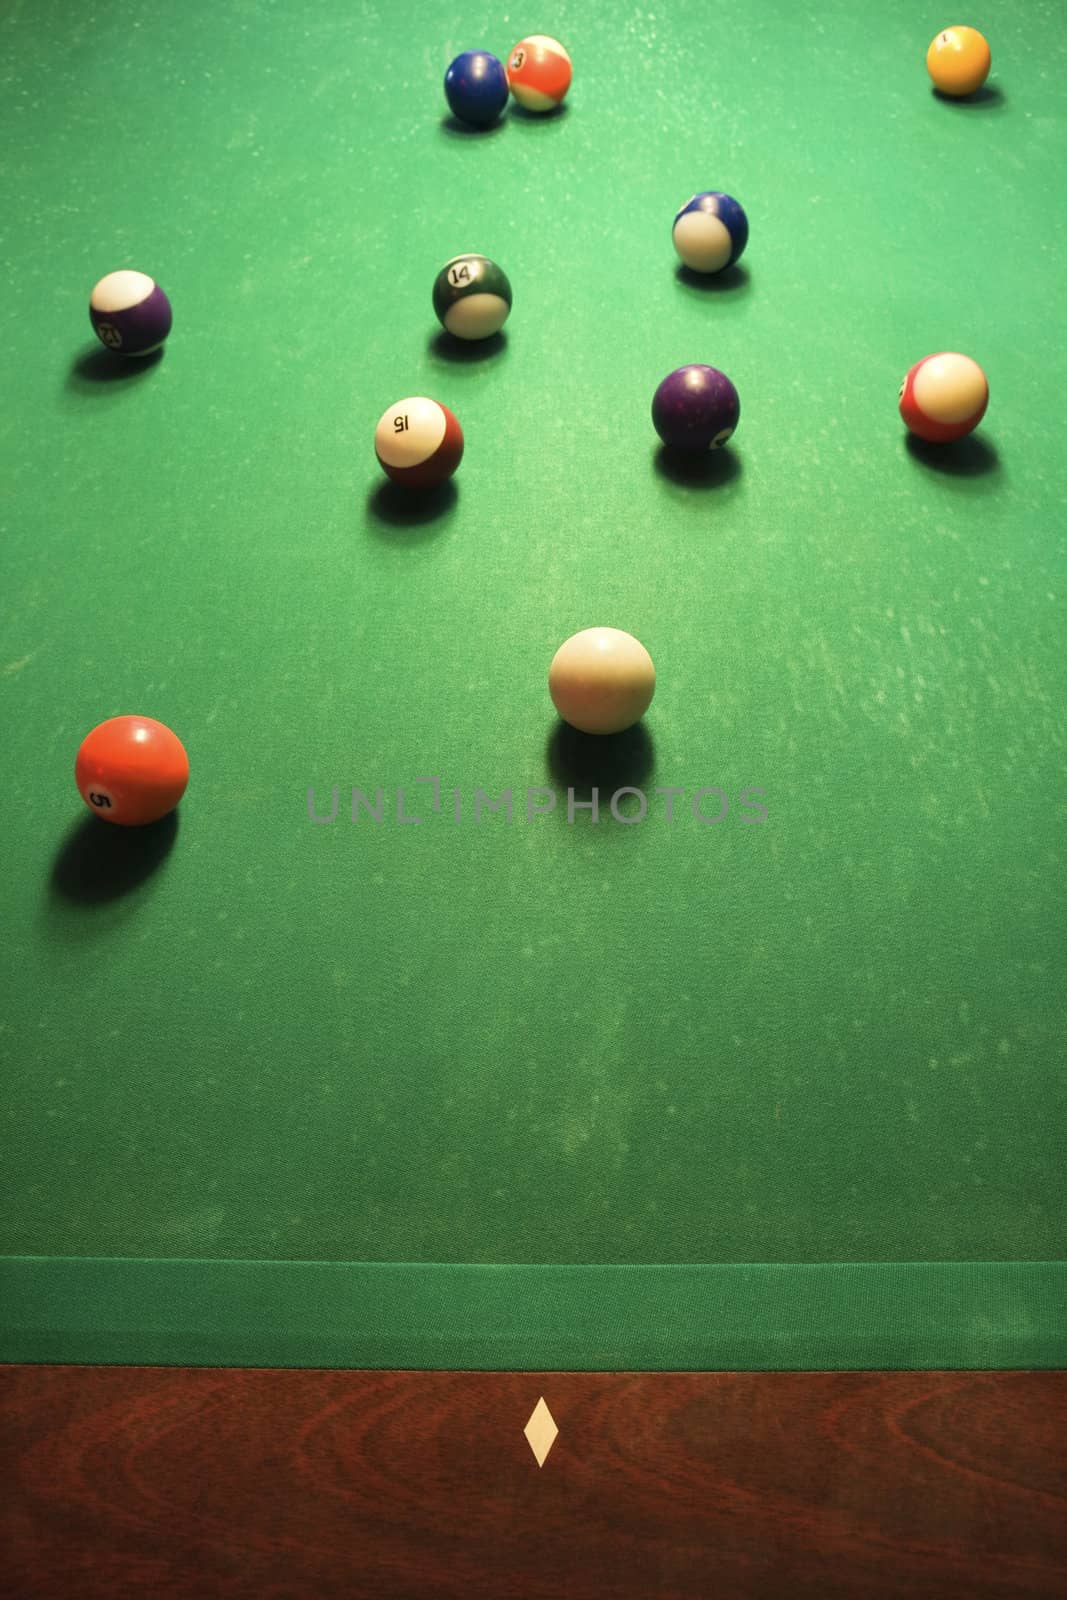 Balls on pool table. by iofoto